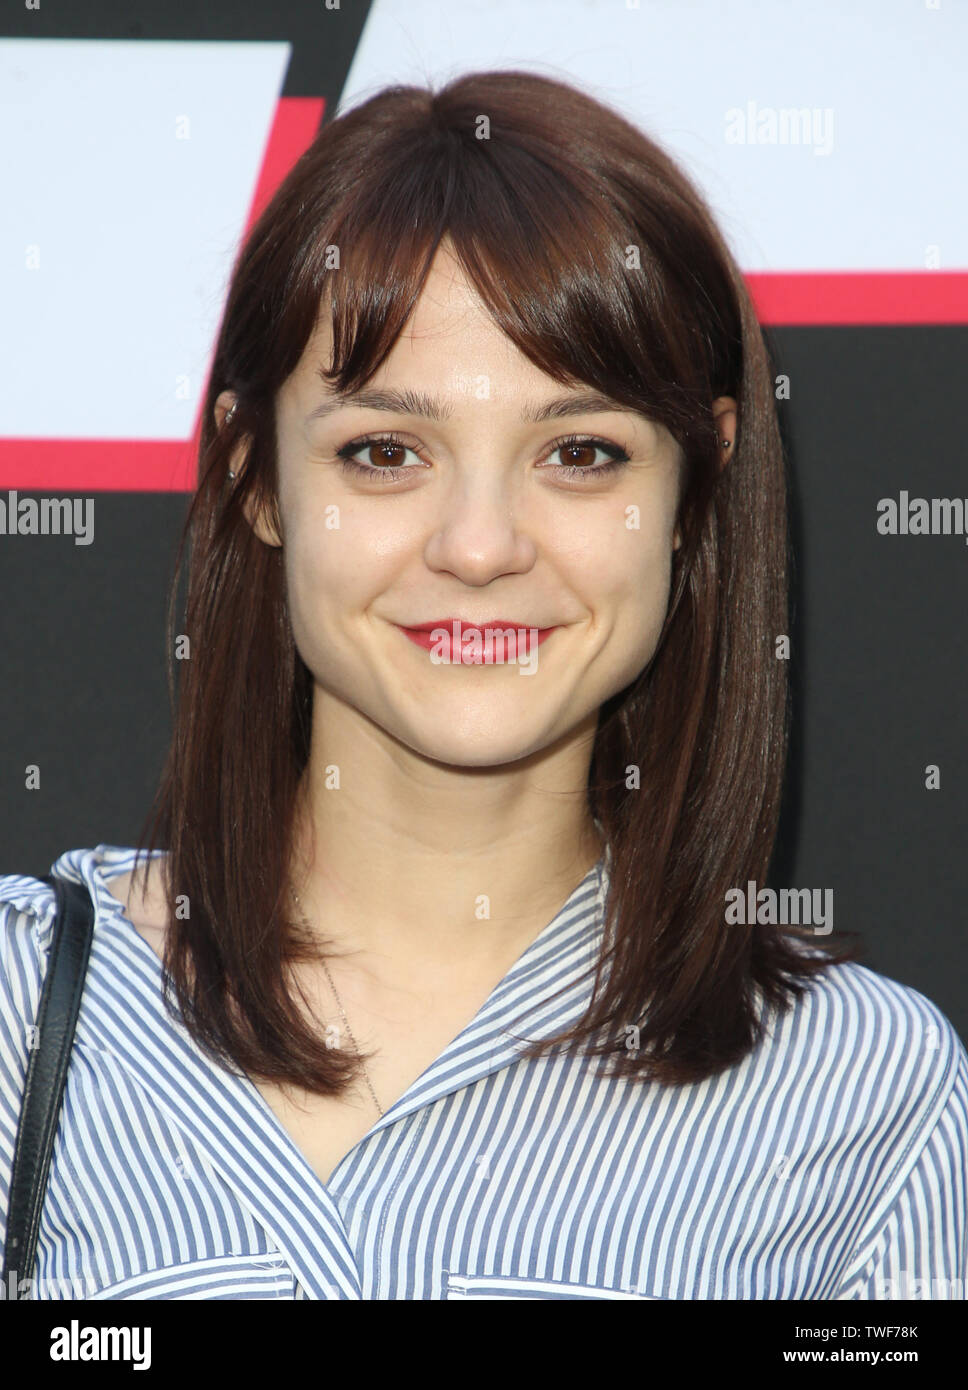 Hollywood, Ca. 19th June, 2019. Kathryn Prescott, attends The Premiere of Child's Play at ArcLight Cinemas in Hollywood California on June 19, 2019 Credit: Faye Sadou/Media Punch/Alamy Live News Stock Photo